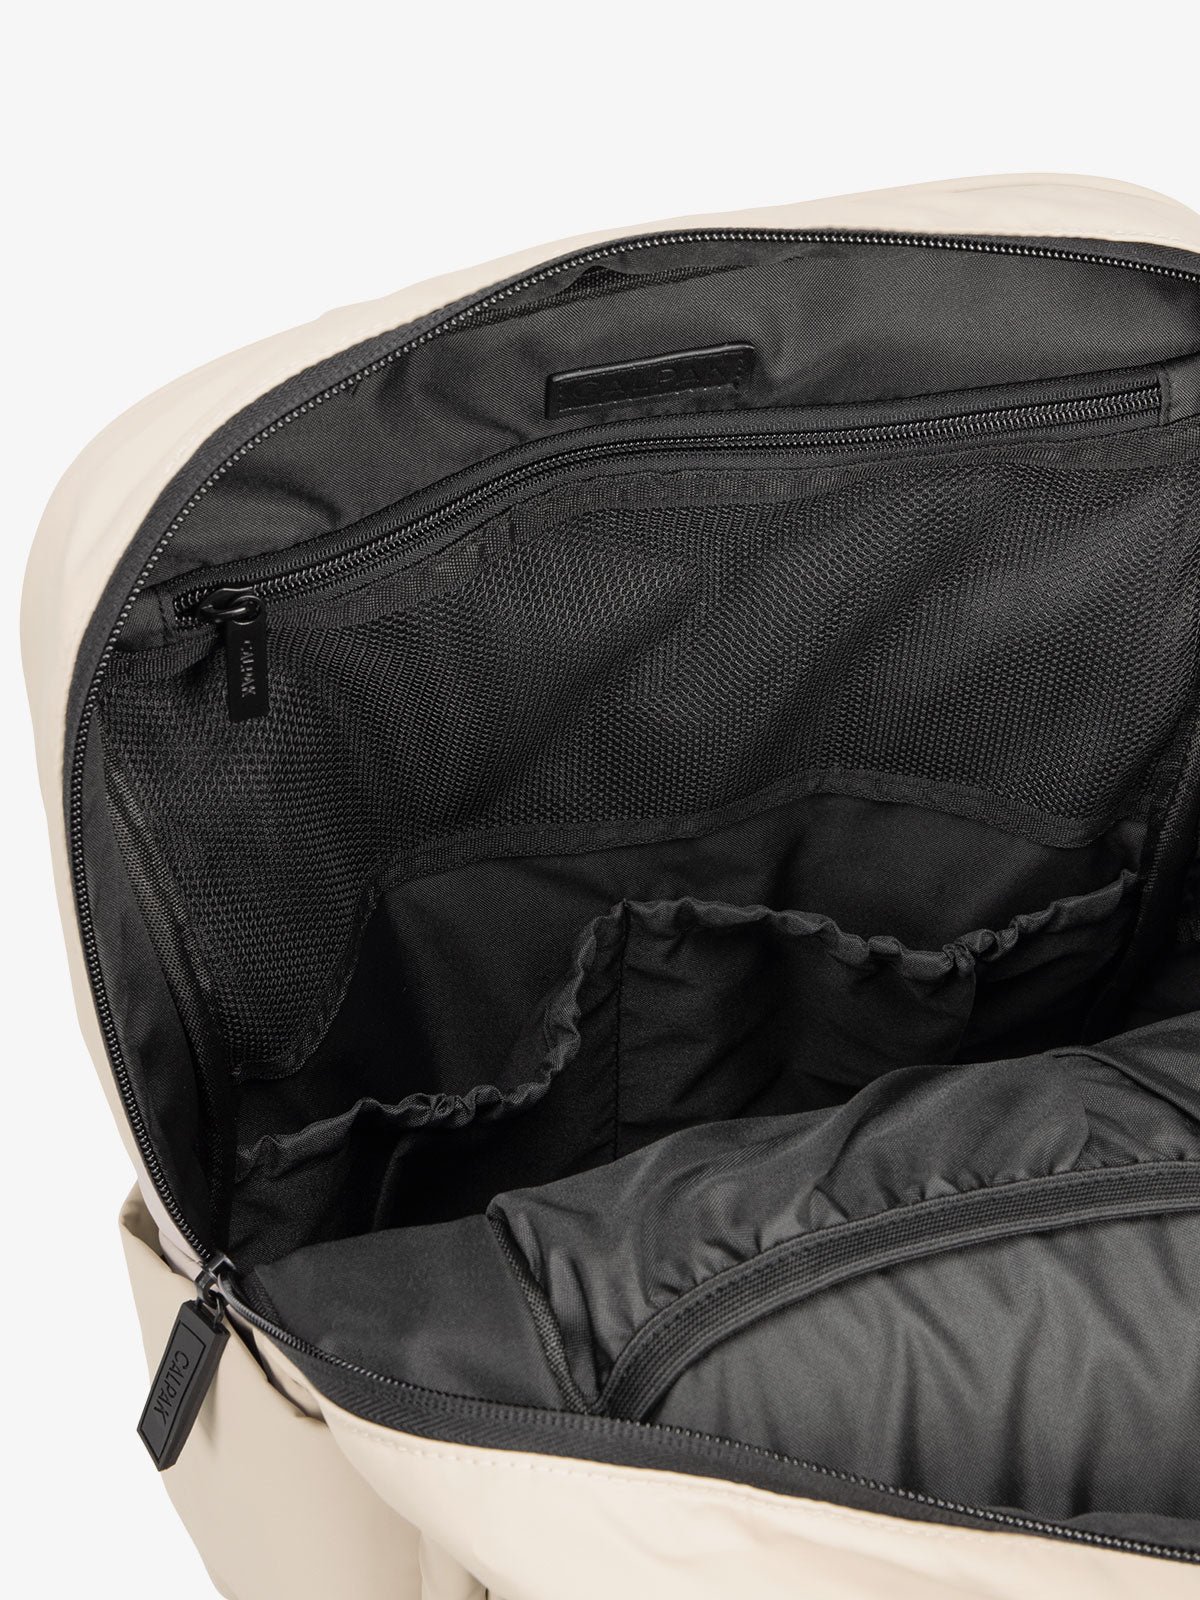 Close up of main compartment of CALPAK laptop backpack with multiple interior pockets in oatmeal